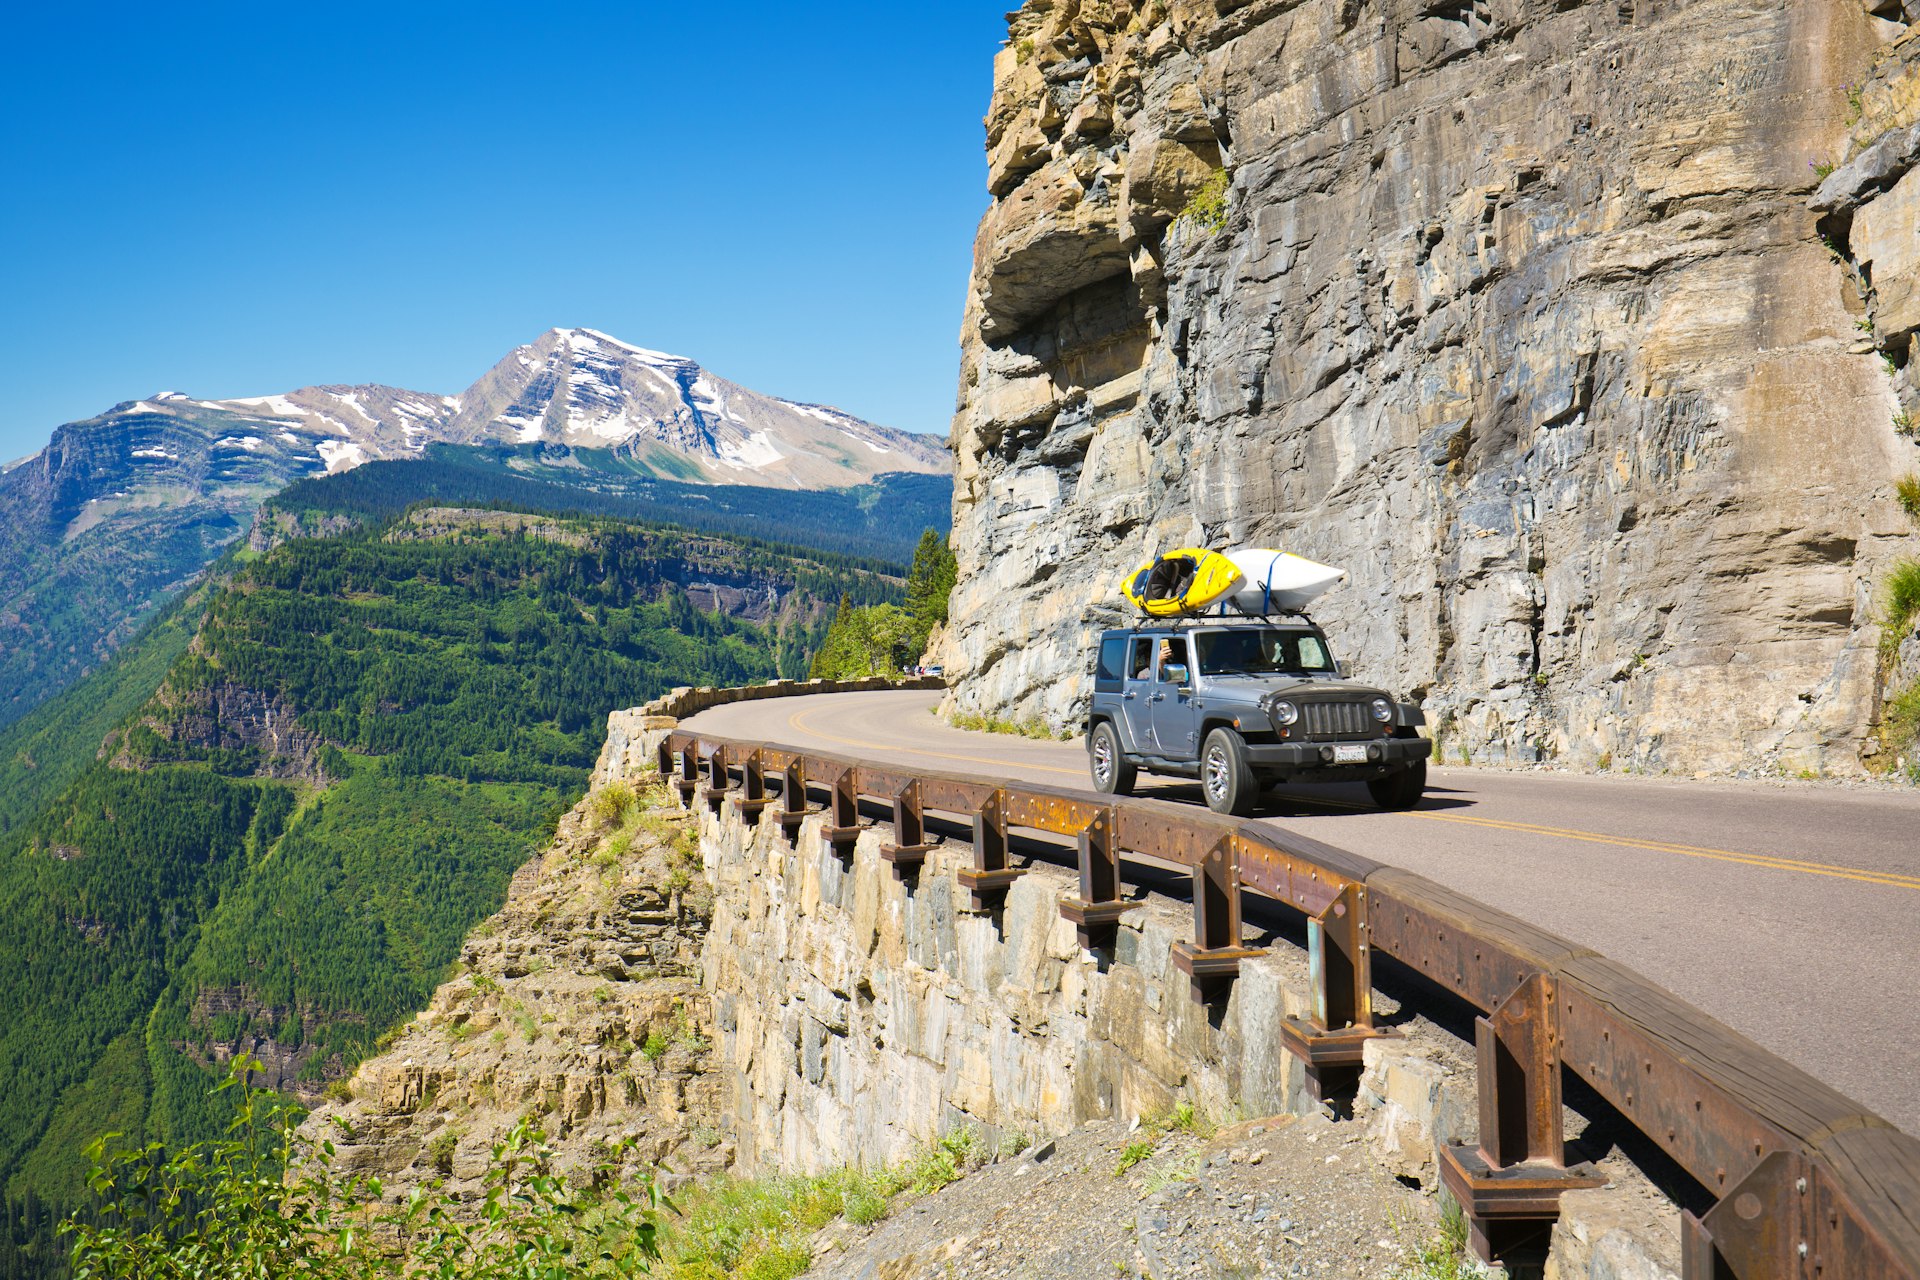 A jeep with kayaks on its roof drives along Going-to-the-Sun Rd, Glacier National Park, Montana, USA